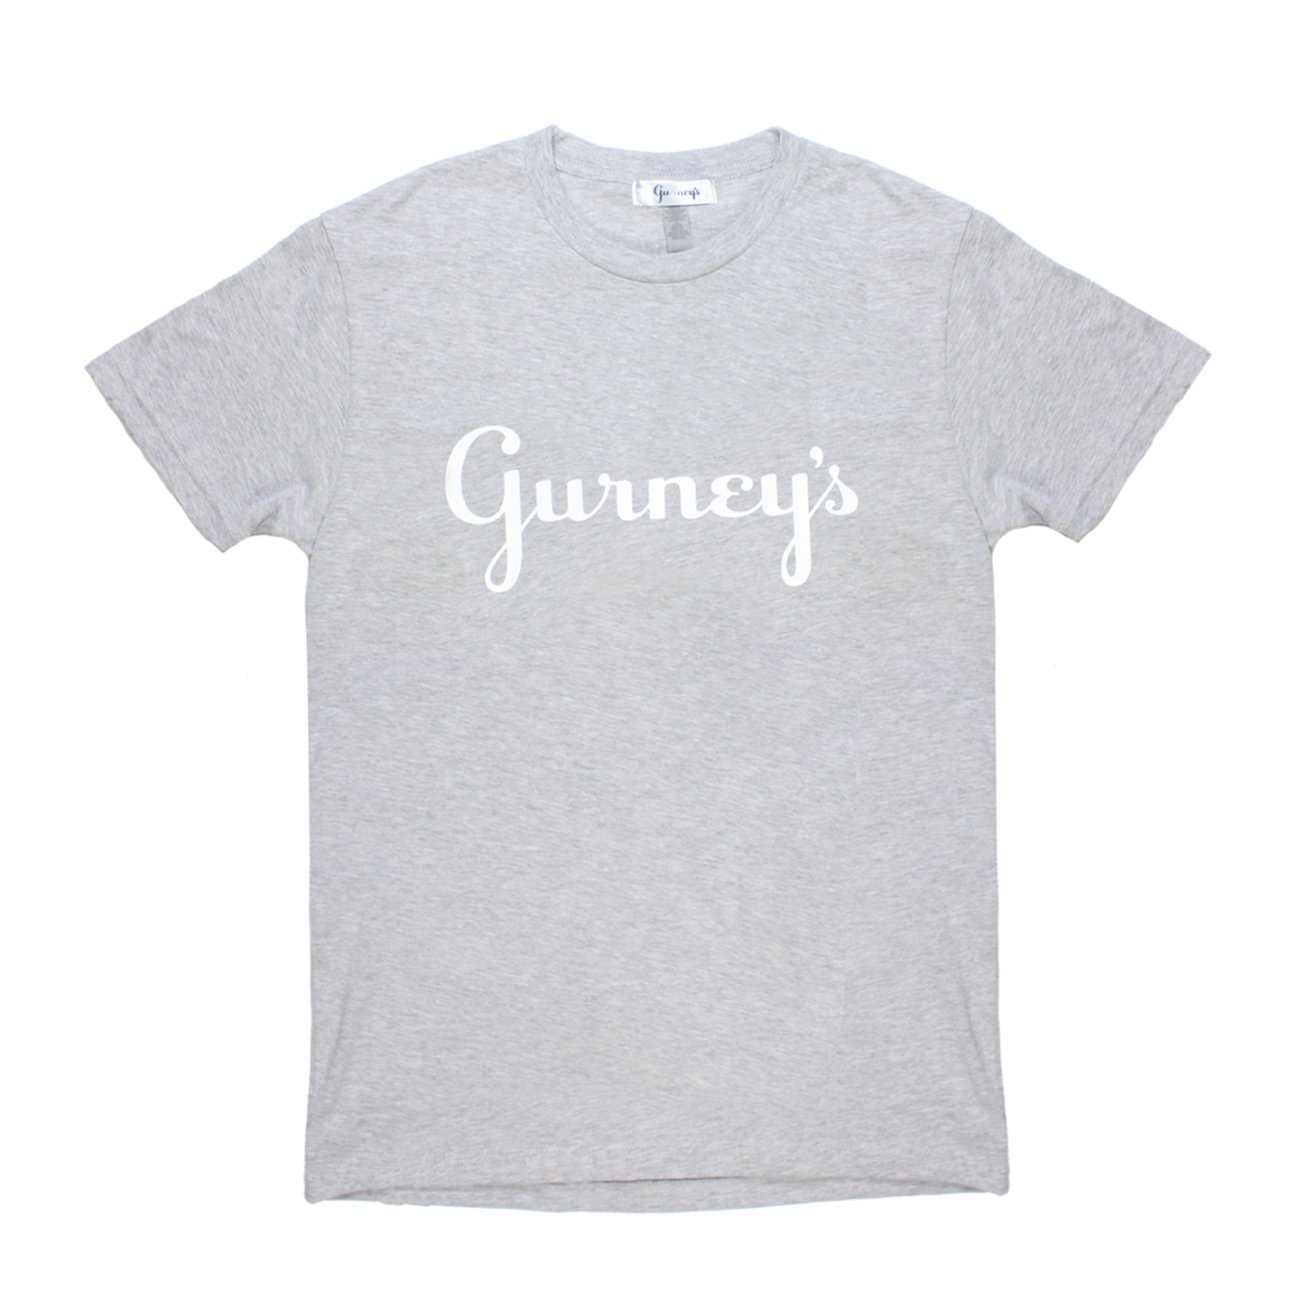 Gurney's T-shirt Screened across chest front grey